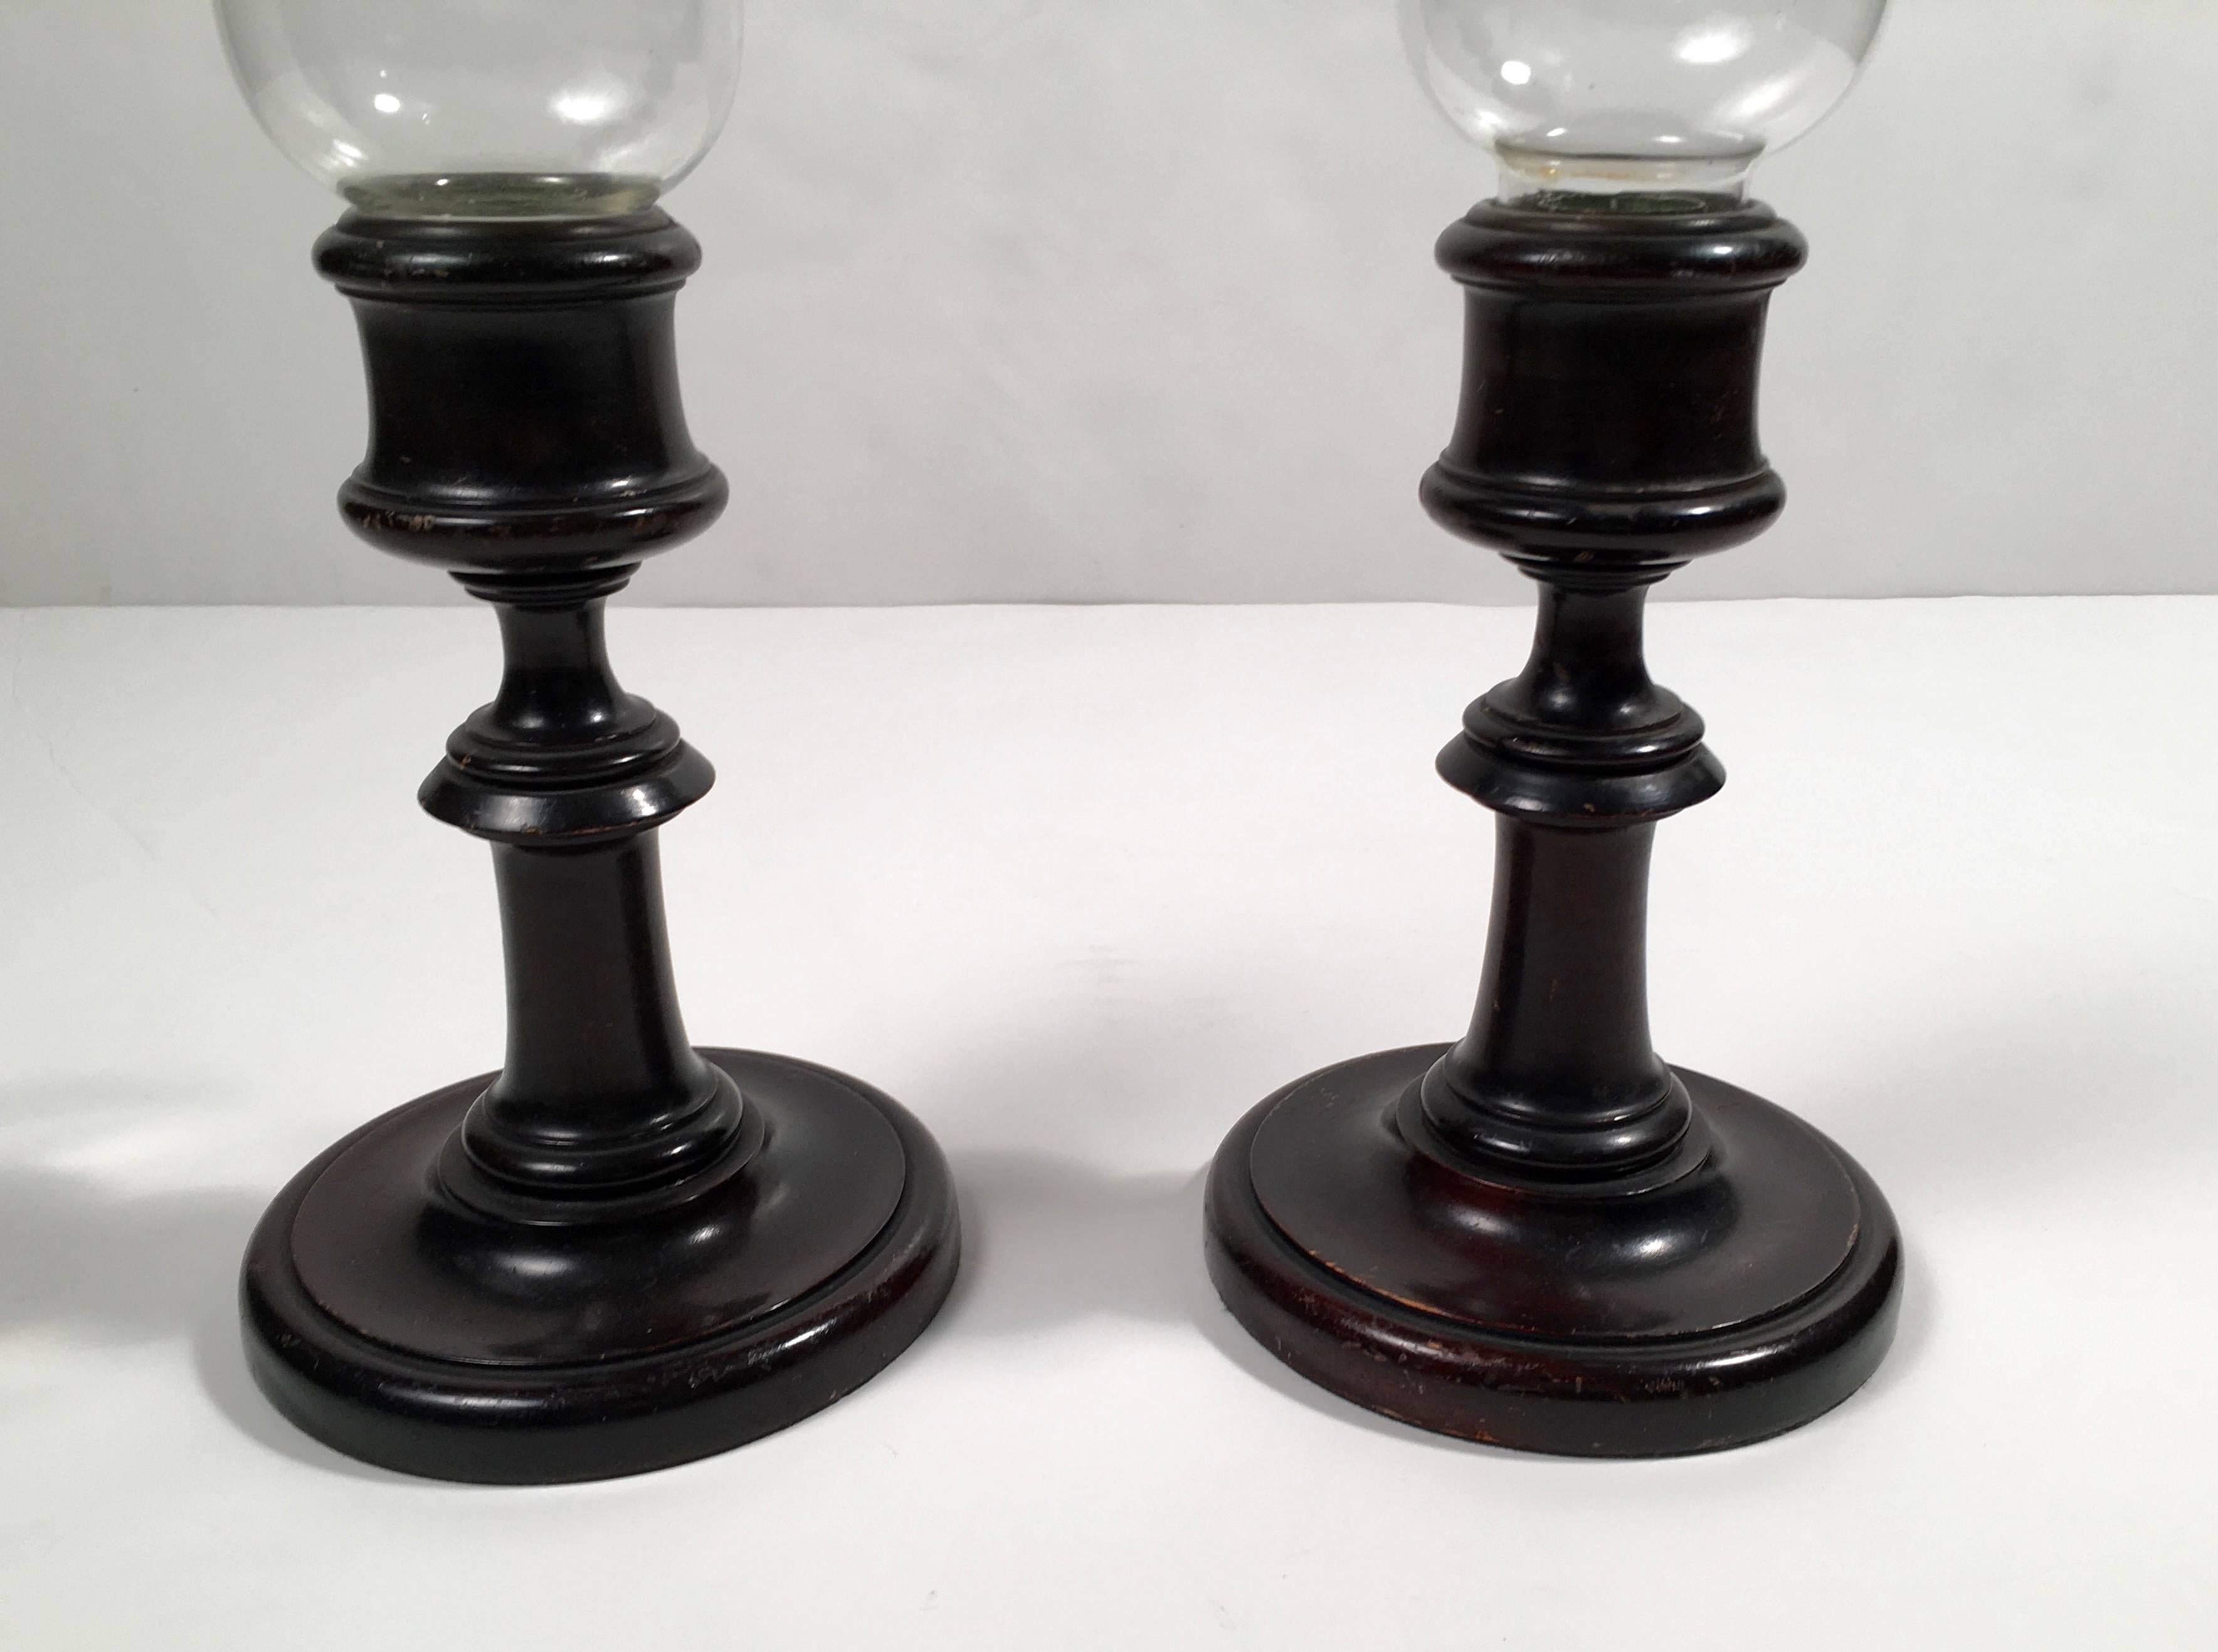 A pair of ebonized turned solid mahogany candlesticks, the removable, inverted bell shaped glass hurricane shades etched with grapes and vines, the underside of the bases with old green felt, one retaining its original Wanamaker's store label: 